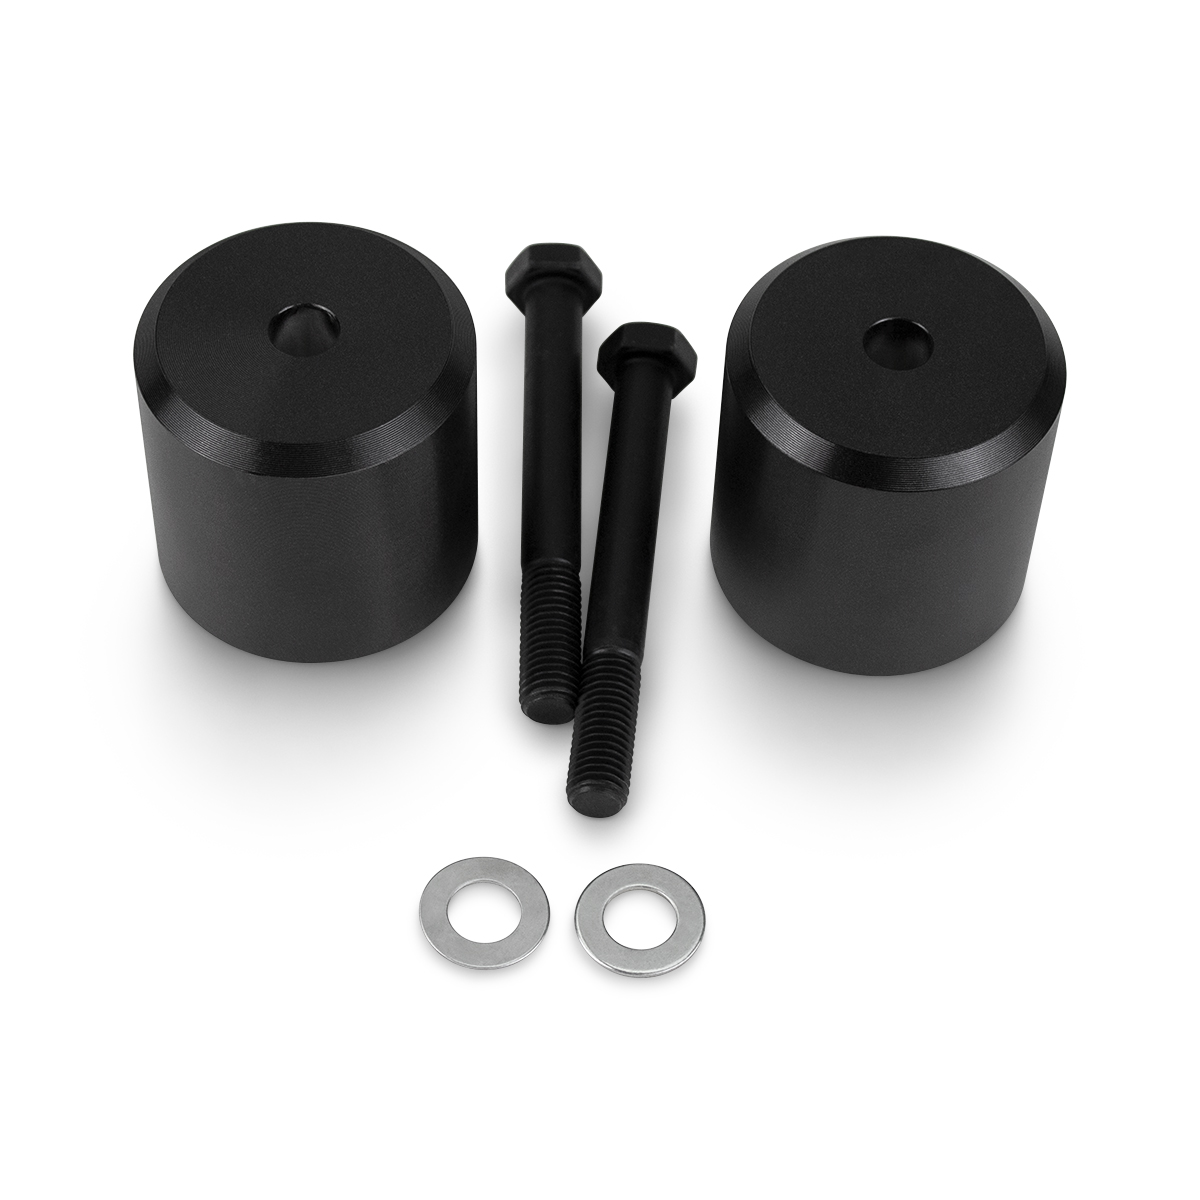 3 Inch Front Leveling Lift Black Kit For Ford F250 F350 Super Duty 4WD 4x4